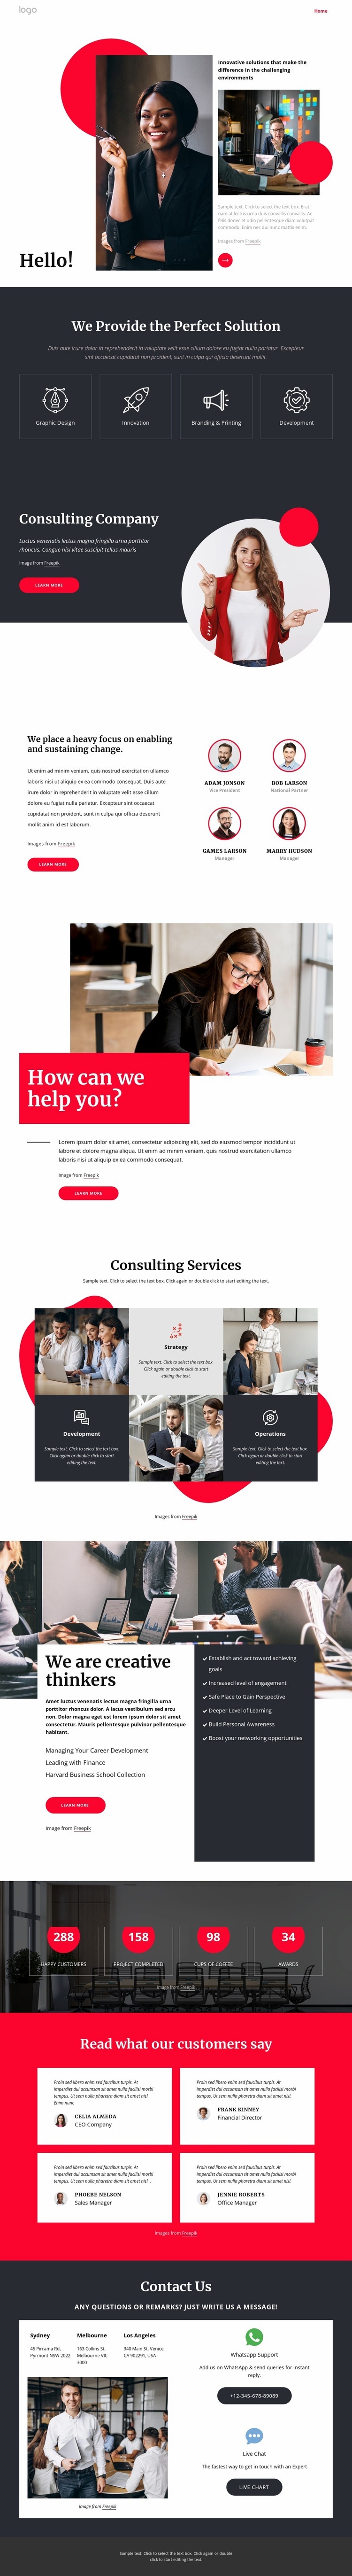 Consulting company NYC Homepage Design